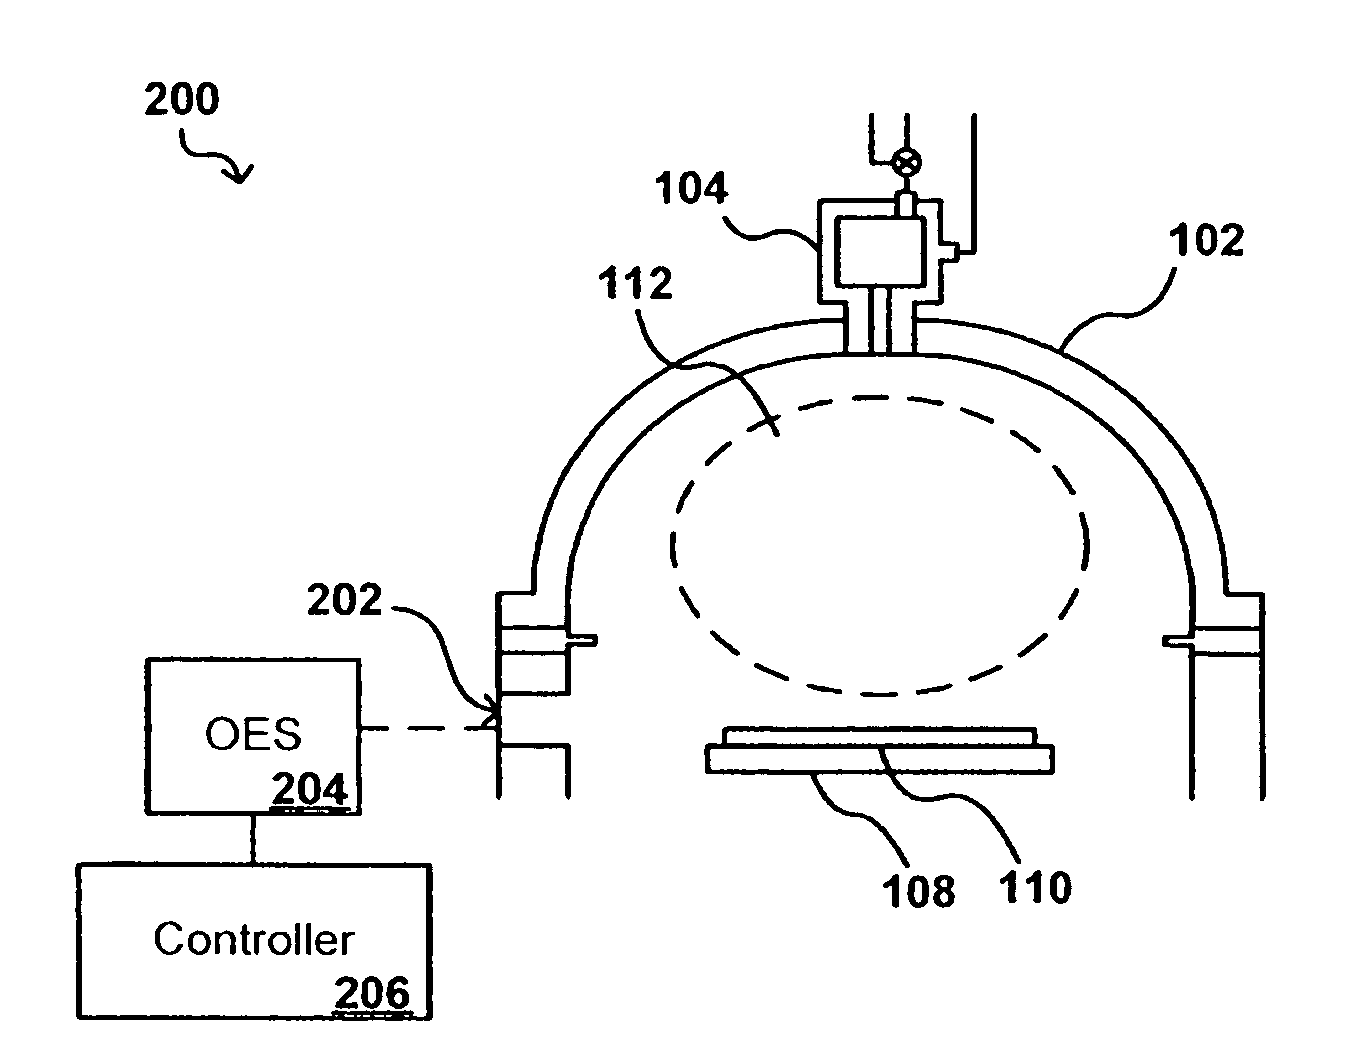 In-situ process state monitoring of chamber